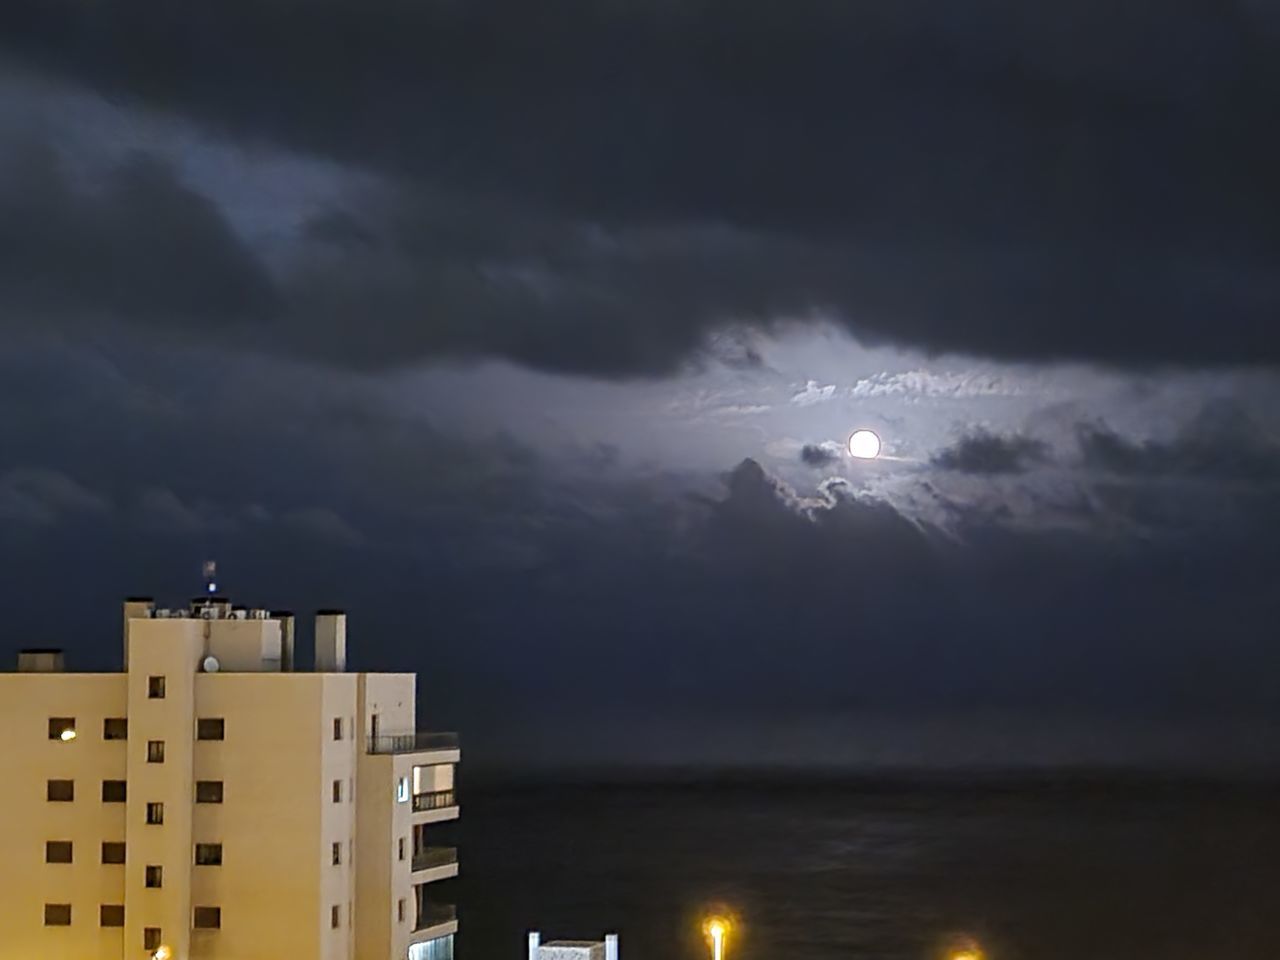 sky, cloud, storm, architecture, building exterior, night, building, built structure, city, thunderstorm, storm cloud, illuminated, lightning, nature, horizon, thunder, power in nature, dramatic sky, no people, dusk, residential district, environment, evening, moon, cityscape, water, outdoors, beauty in nature, dark, overcast, light, darkness, office building exterior, city life, rain, full moon, apartment